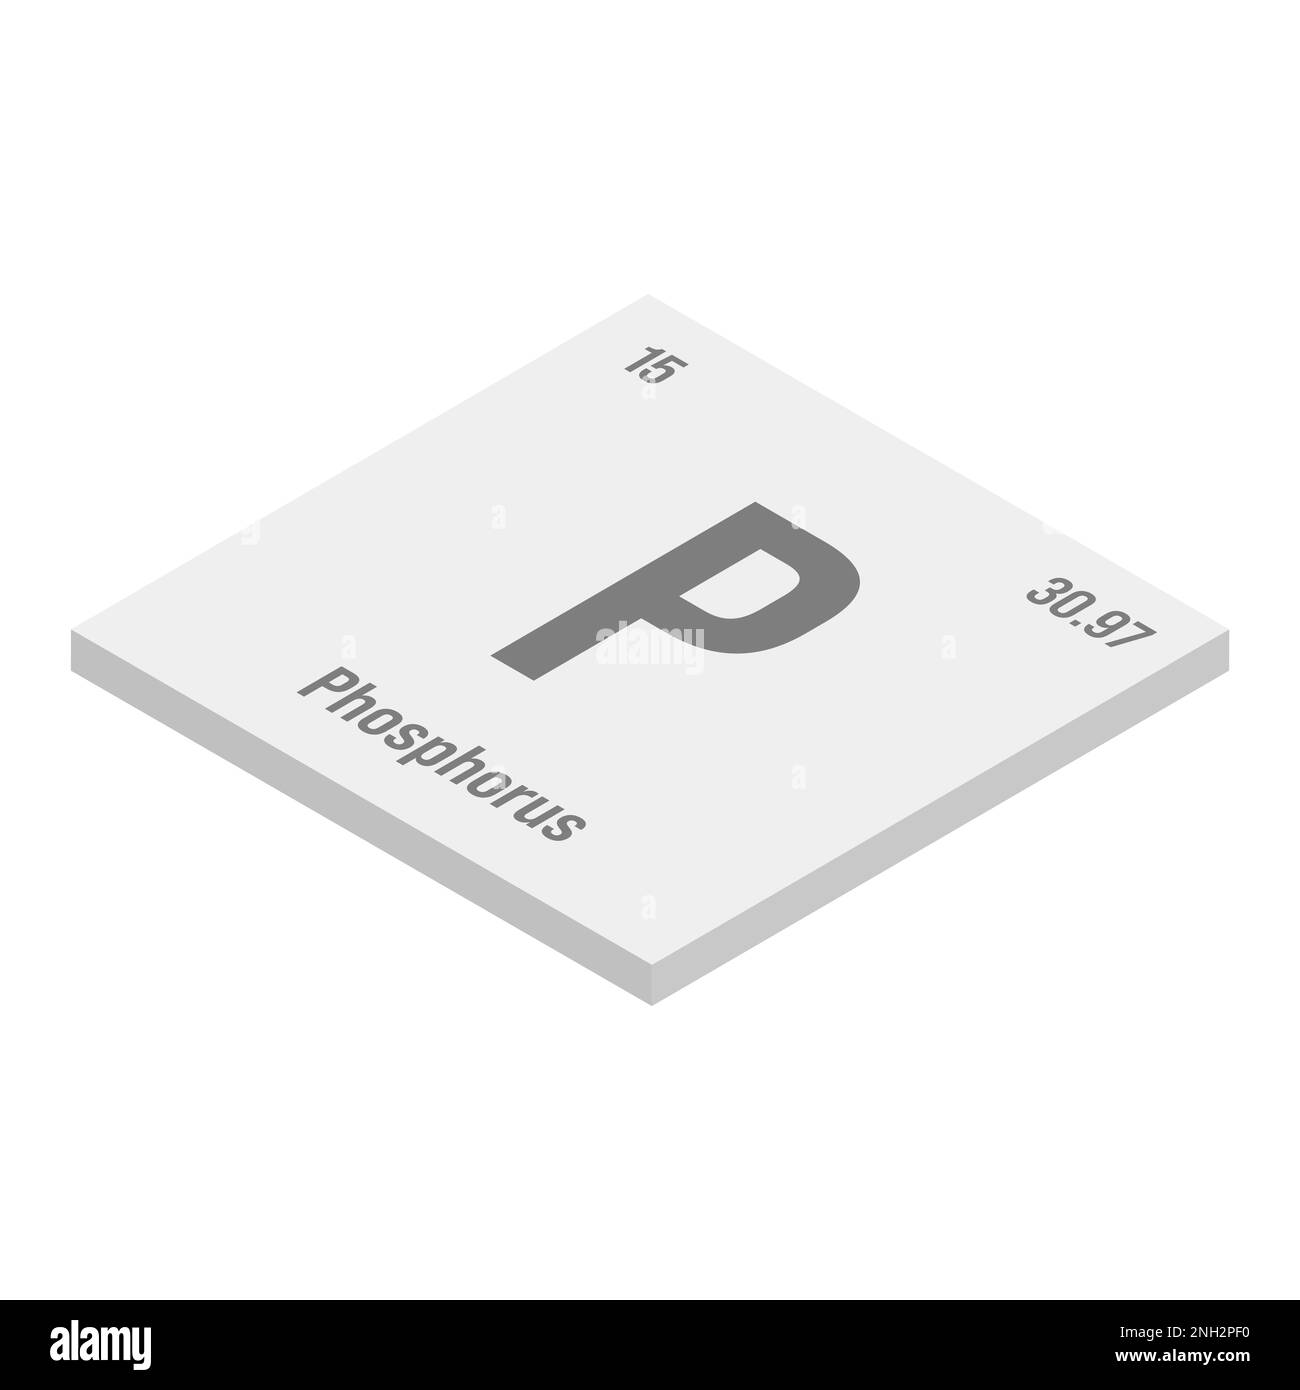 Phosphorus, P, gray 3D isometric illustration of periodic table element with name, symbol, atomic number and weight. Non-metal with various industrial uses, such as in fertilizer, detergents, and as a component of certain types of explosives. Stock Vector